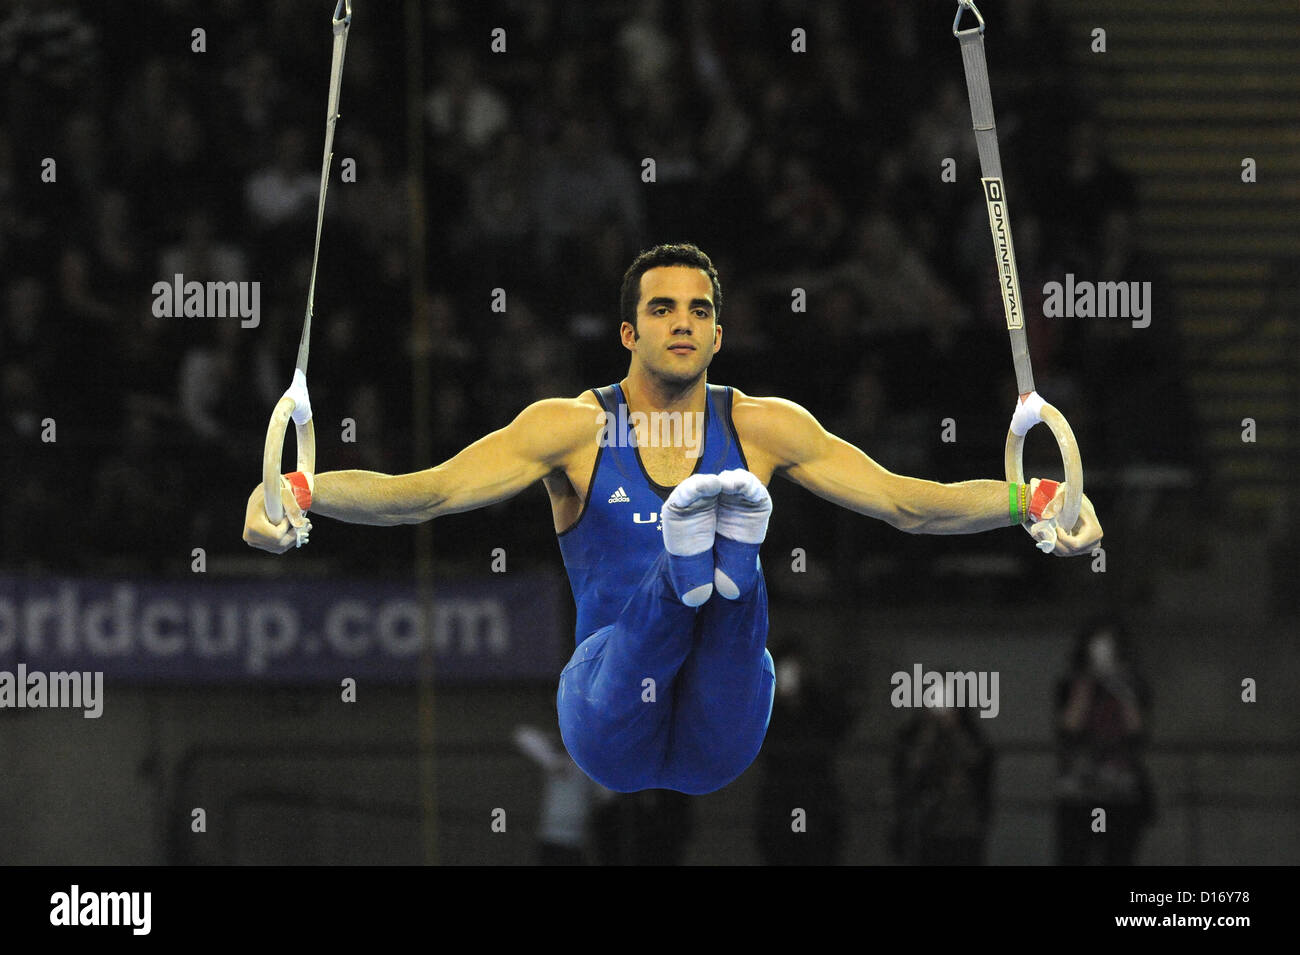 Glasgow, UK. 8th Dec, 2012. Danell Leyva, USA holding an Iron Cross during rings segment of the Glasgow World Cup at the Emirates Arena. Stock Photo